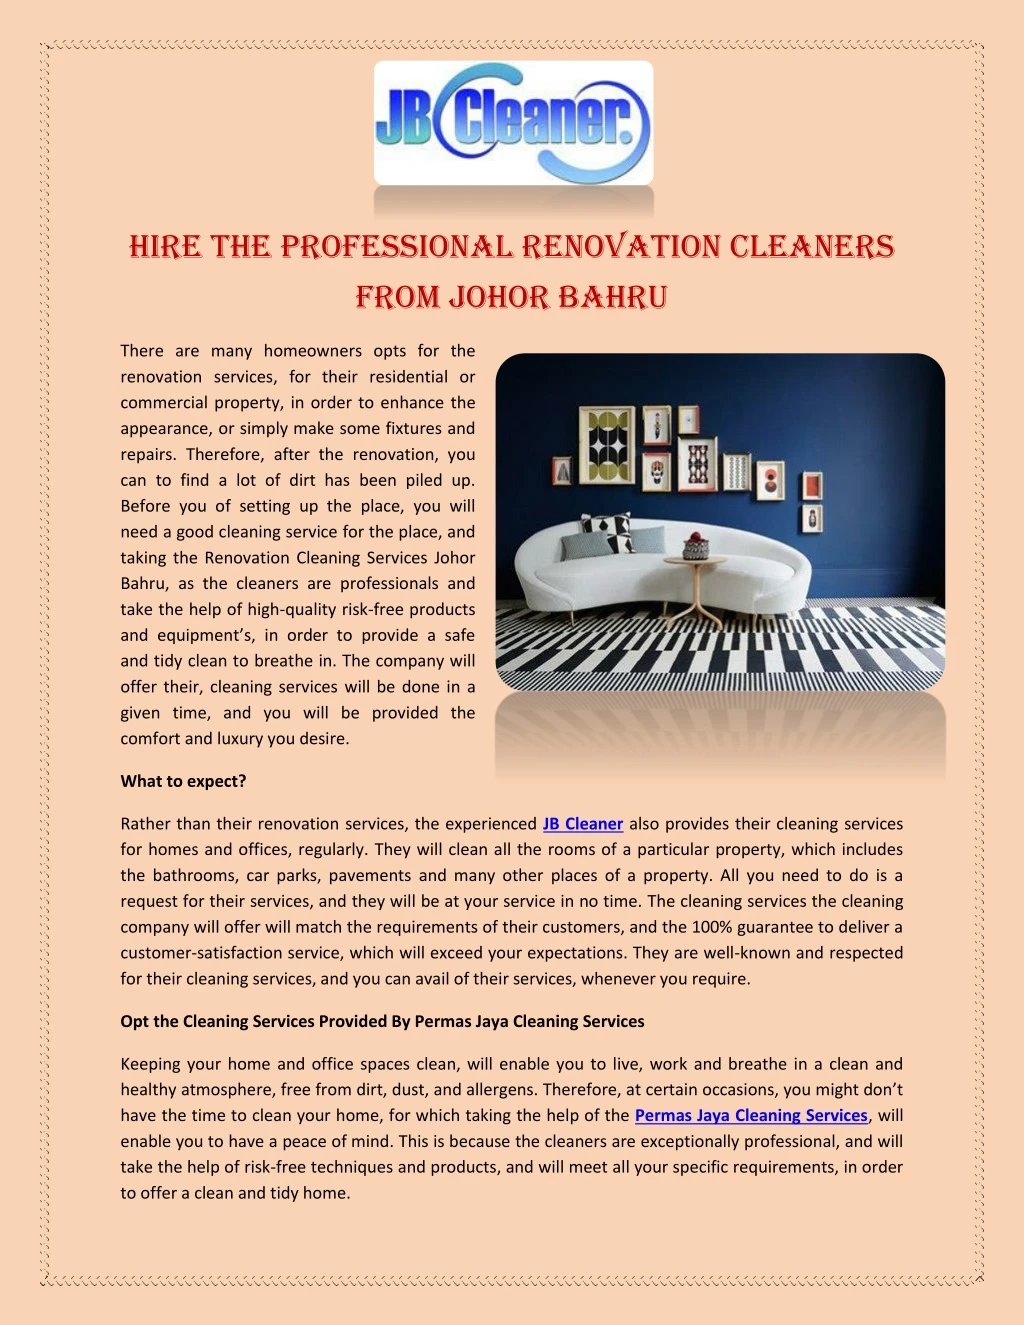 hire the professional renovation cleaners from